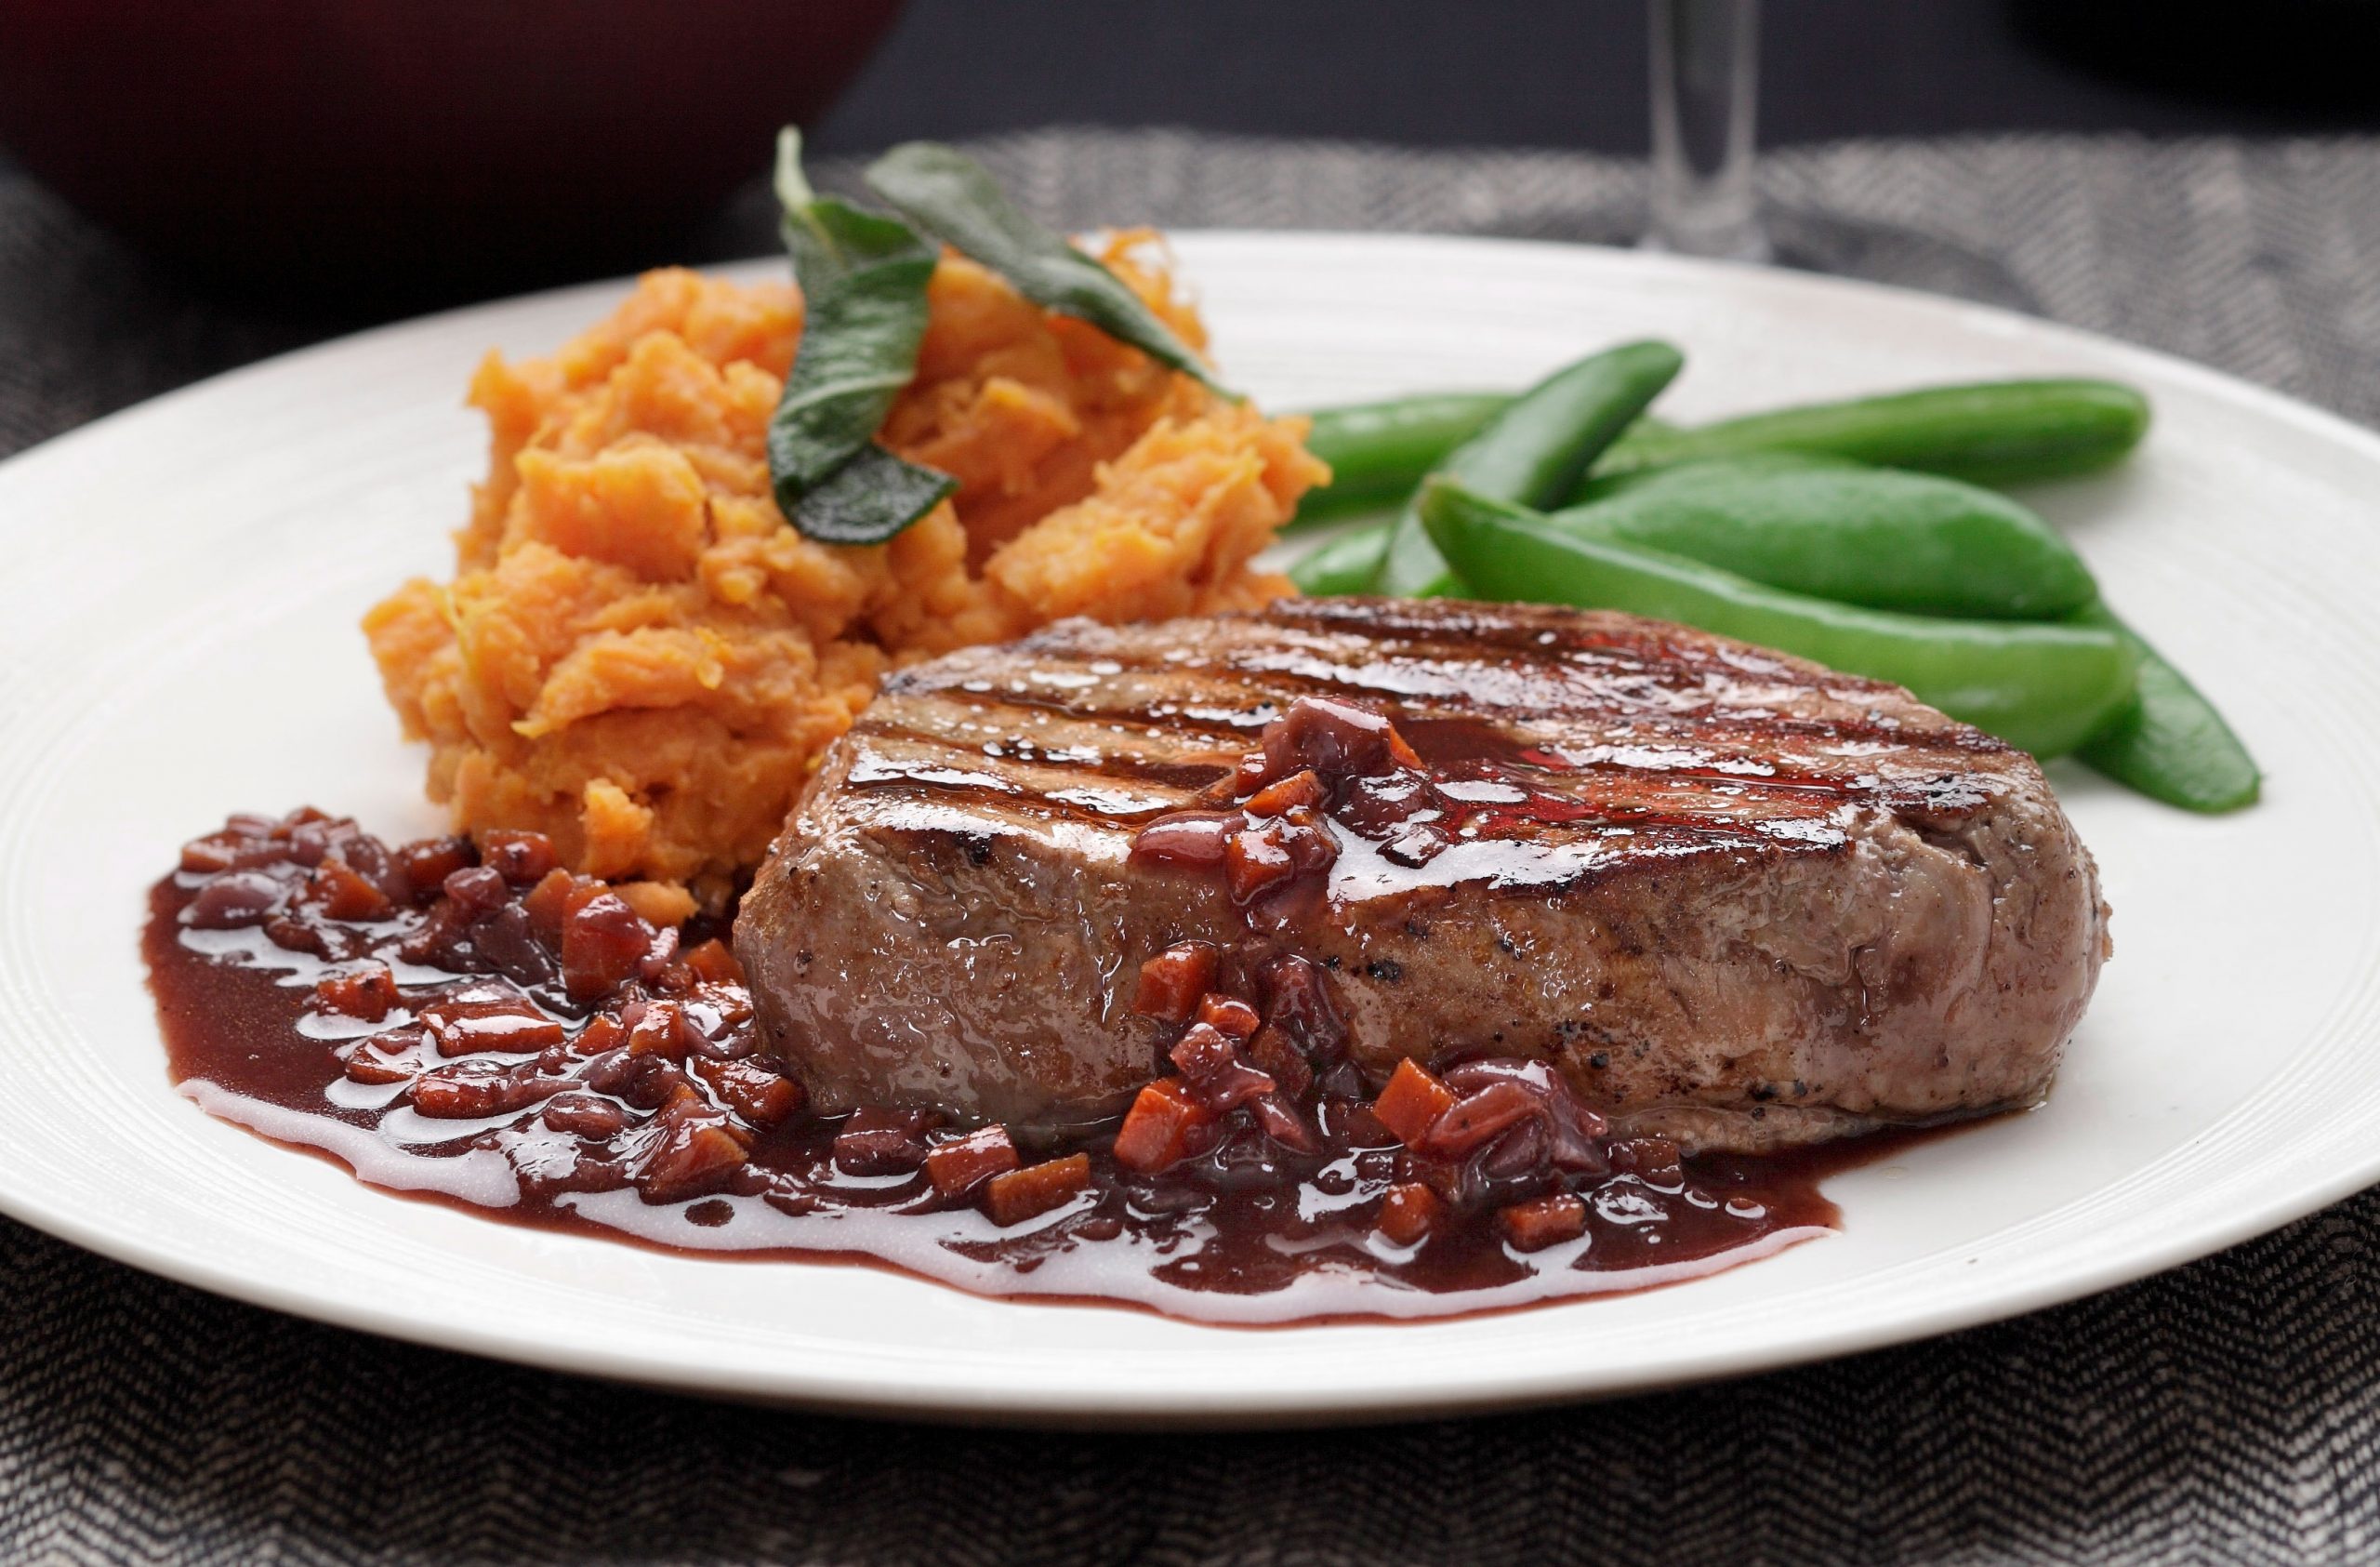 Fillet steak with red wine sauce. 